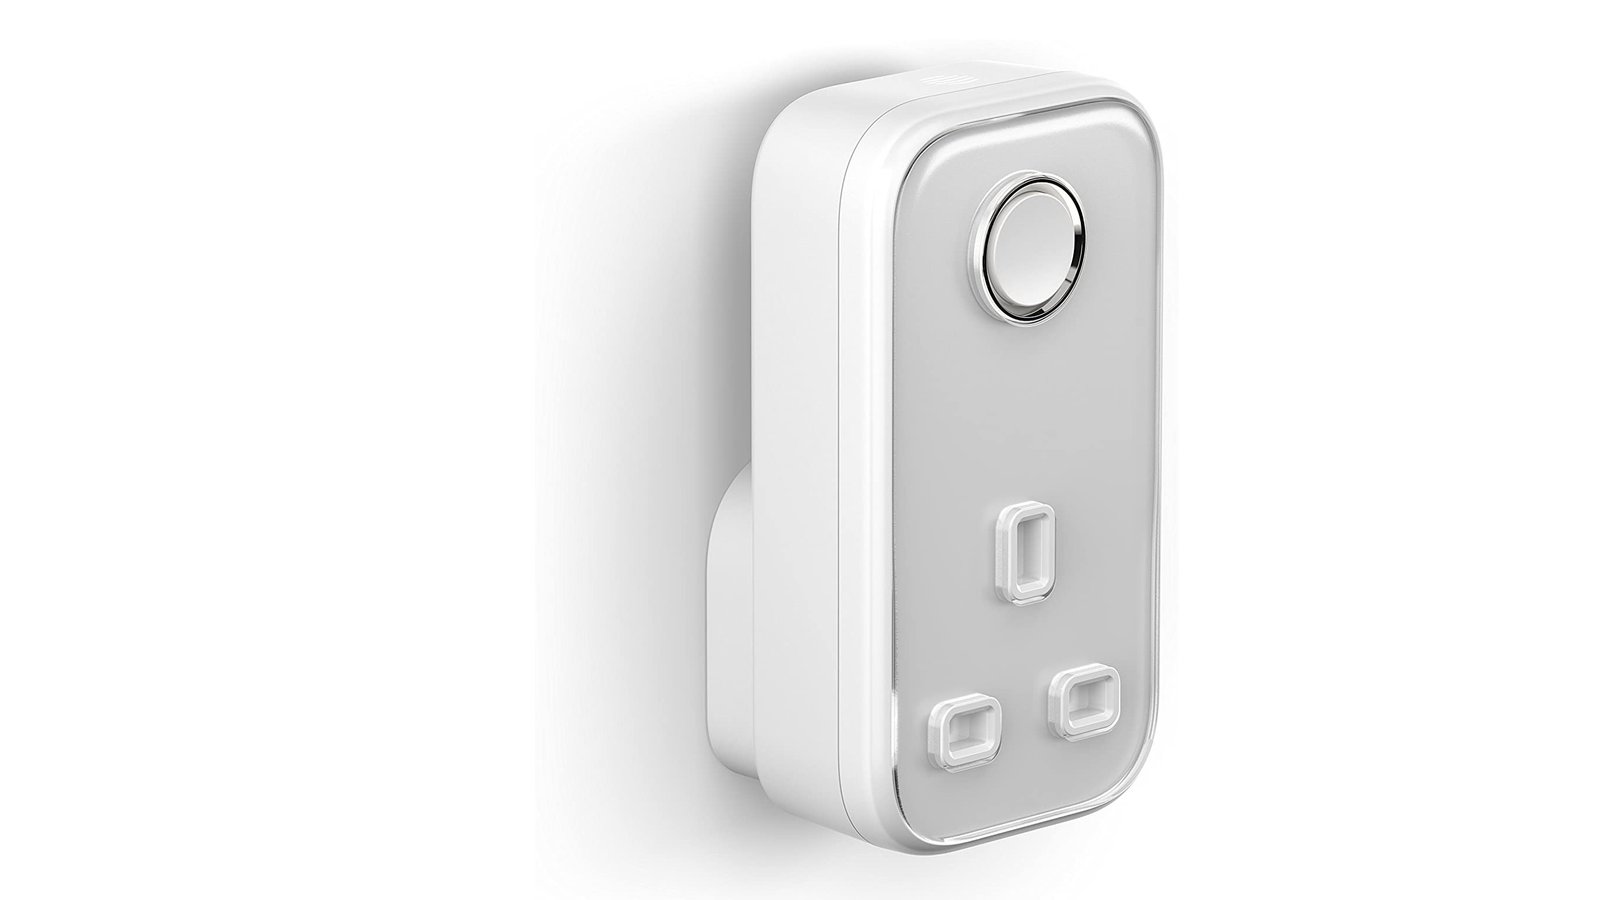 Best smart plugs and switches 2021